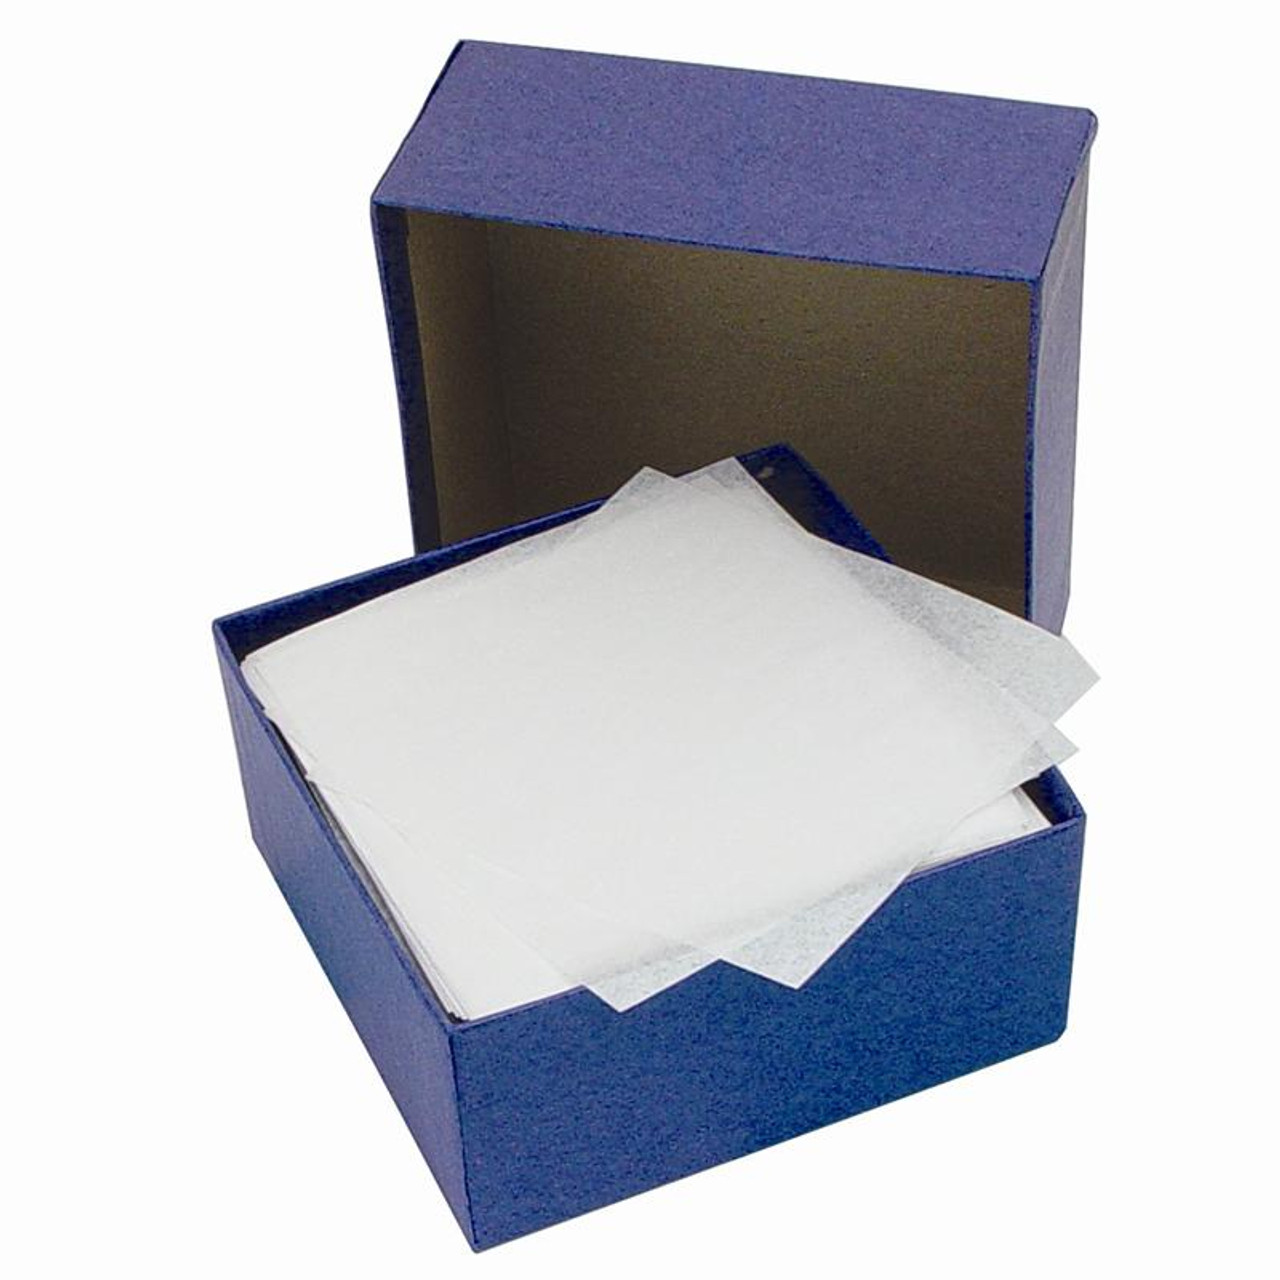 Watch As We Put Our Tear-Proof Paper To The Test